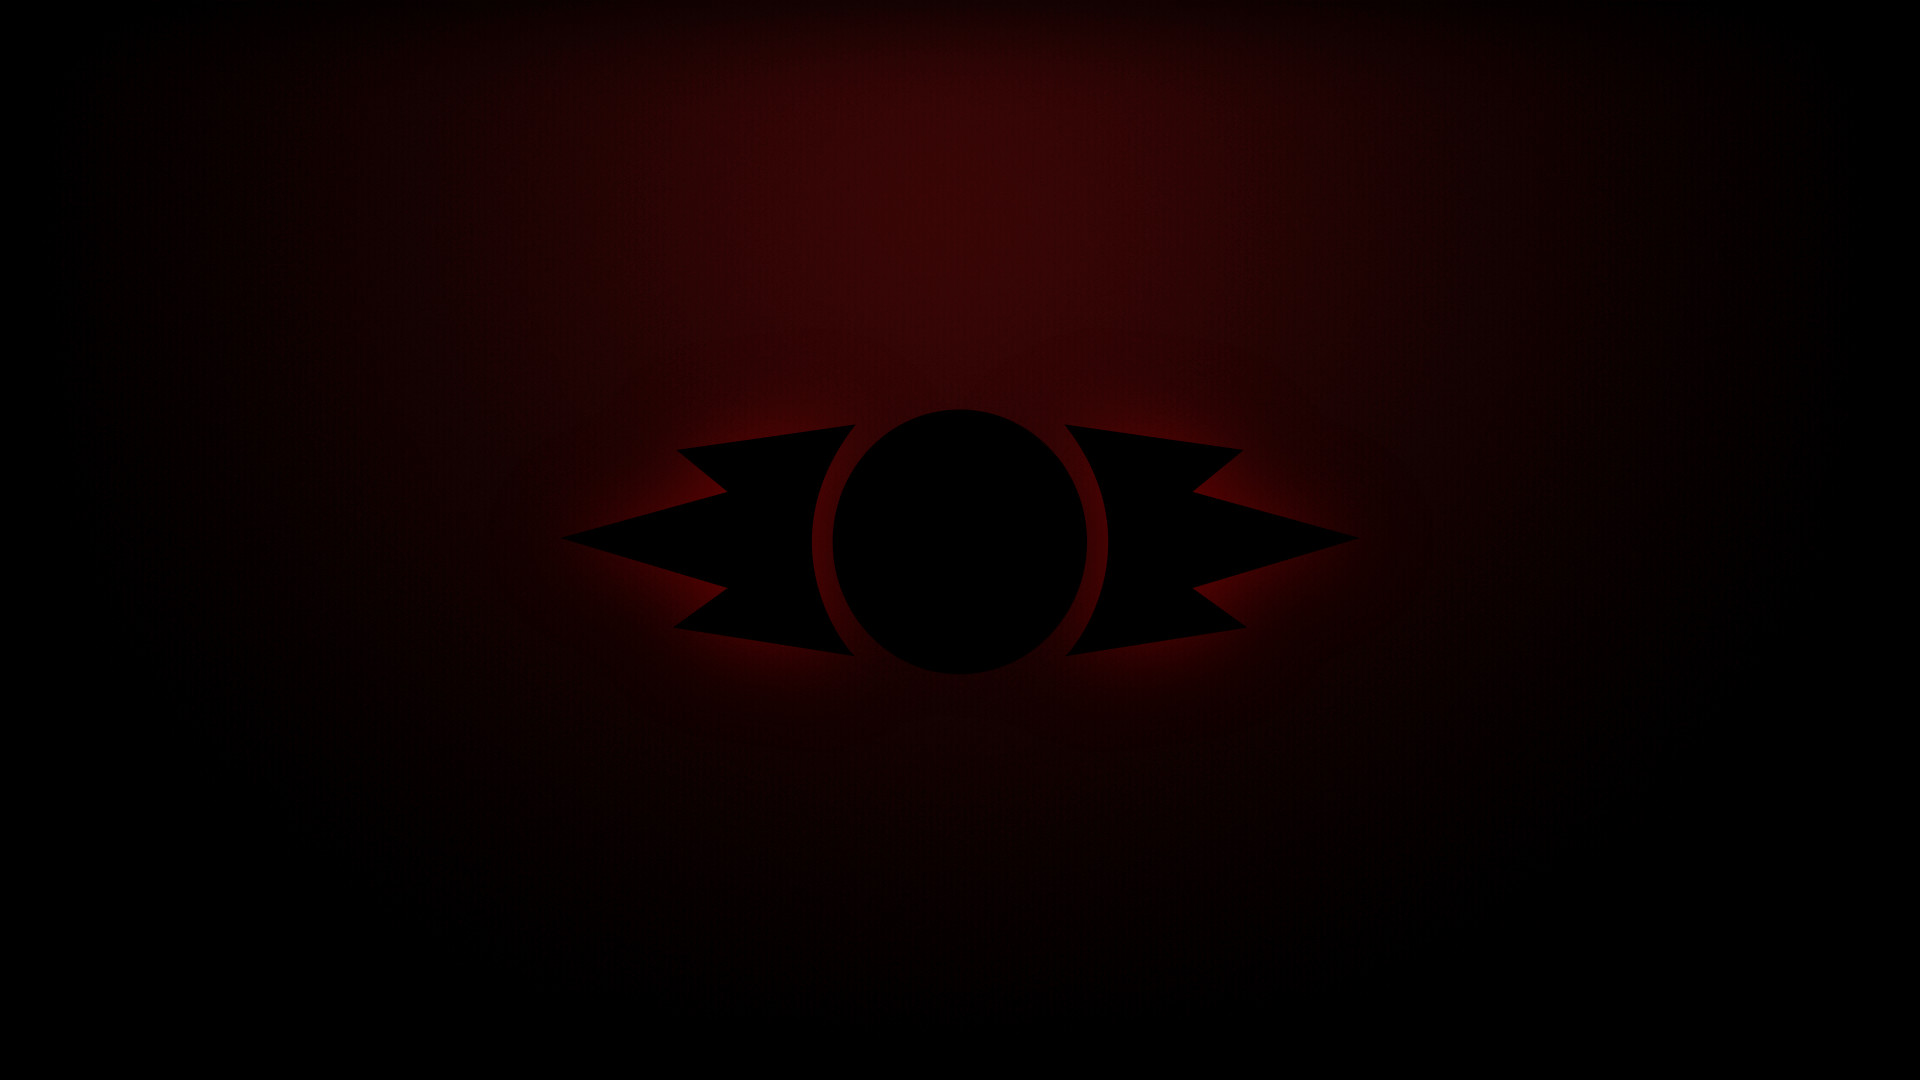 1920x1080 Sith Symbol The sith one, as promised!